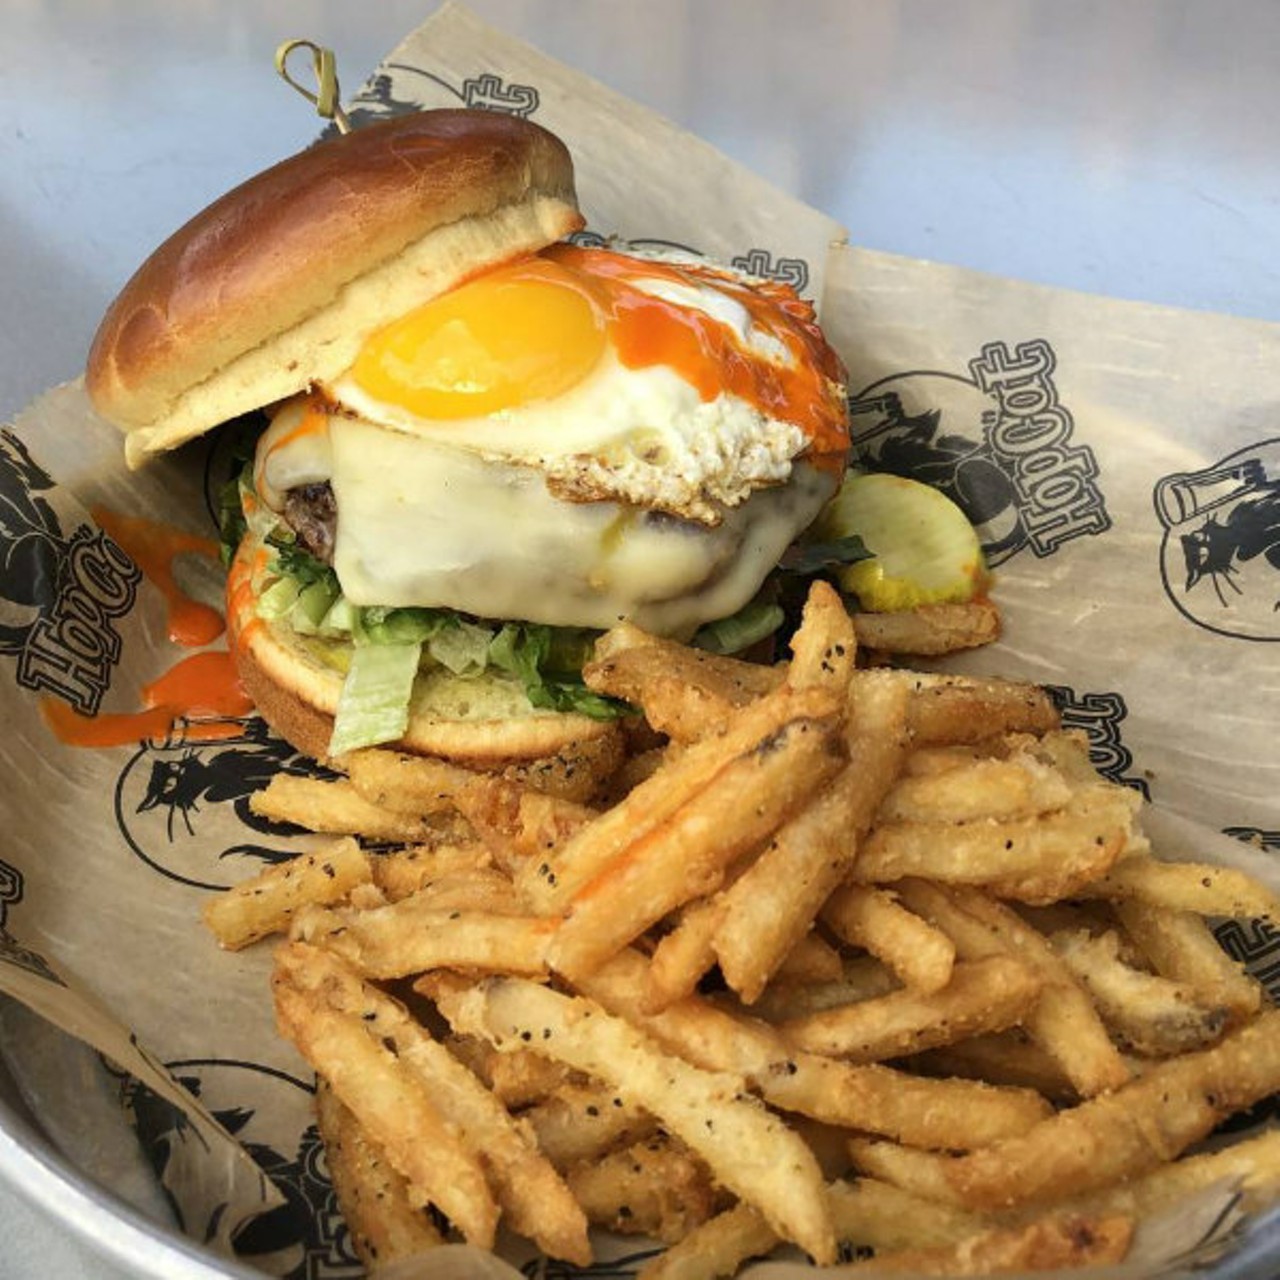 HopCat St. Louis
(6315 Delmar Boulevard; 314-582-3201)
The Beyonc&eacute;: Two Smash patties and one sunny-side up egg topped with bacon, pepper jack cheese, jalapeno and HopCat&#146;s homemade hot sauce.